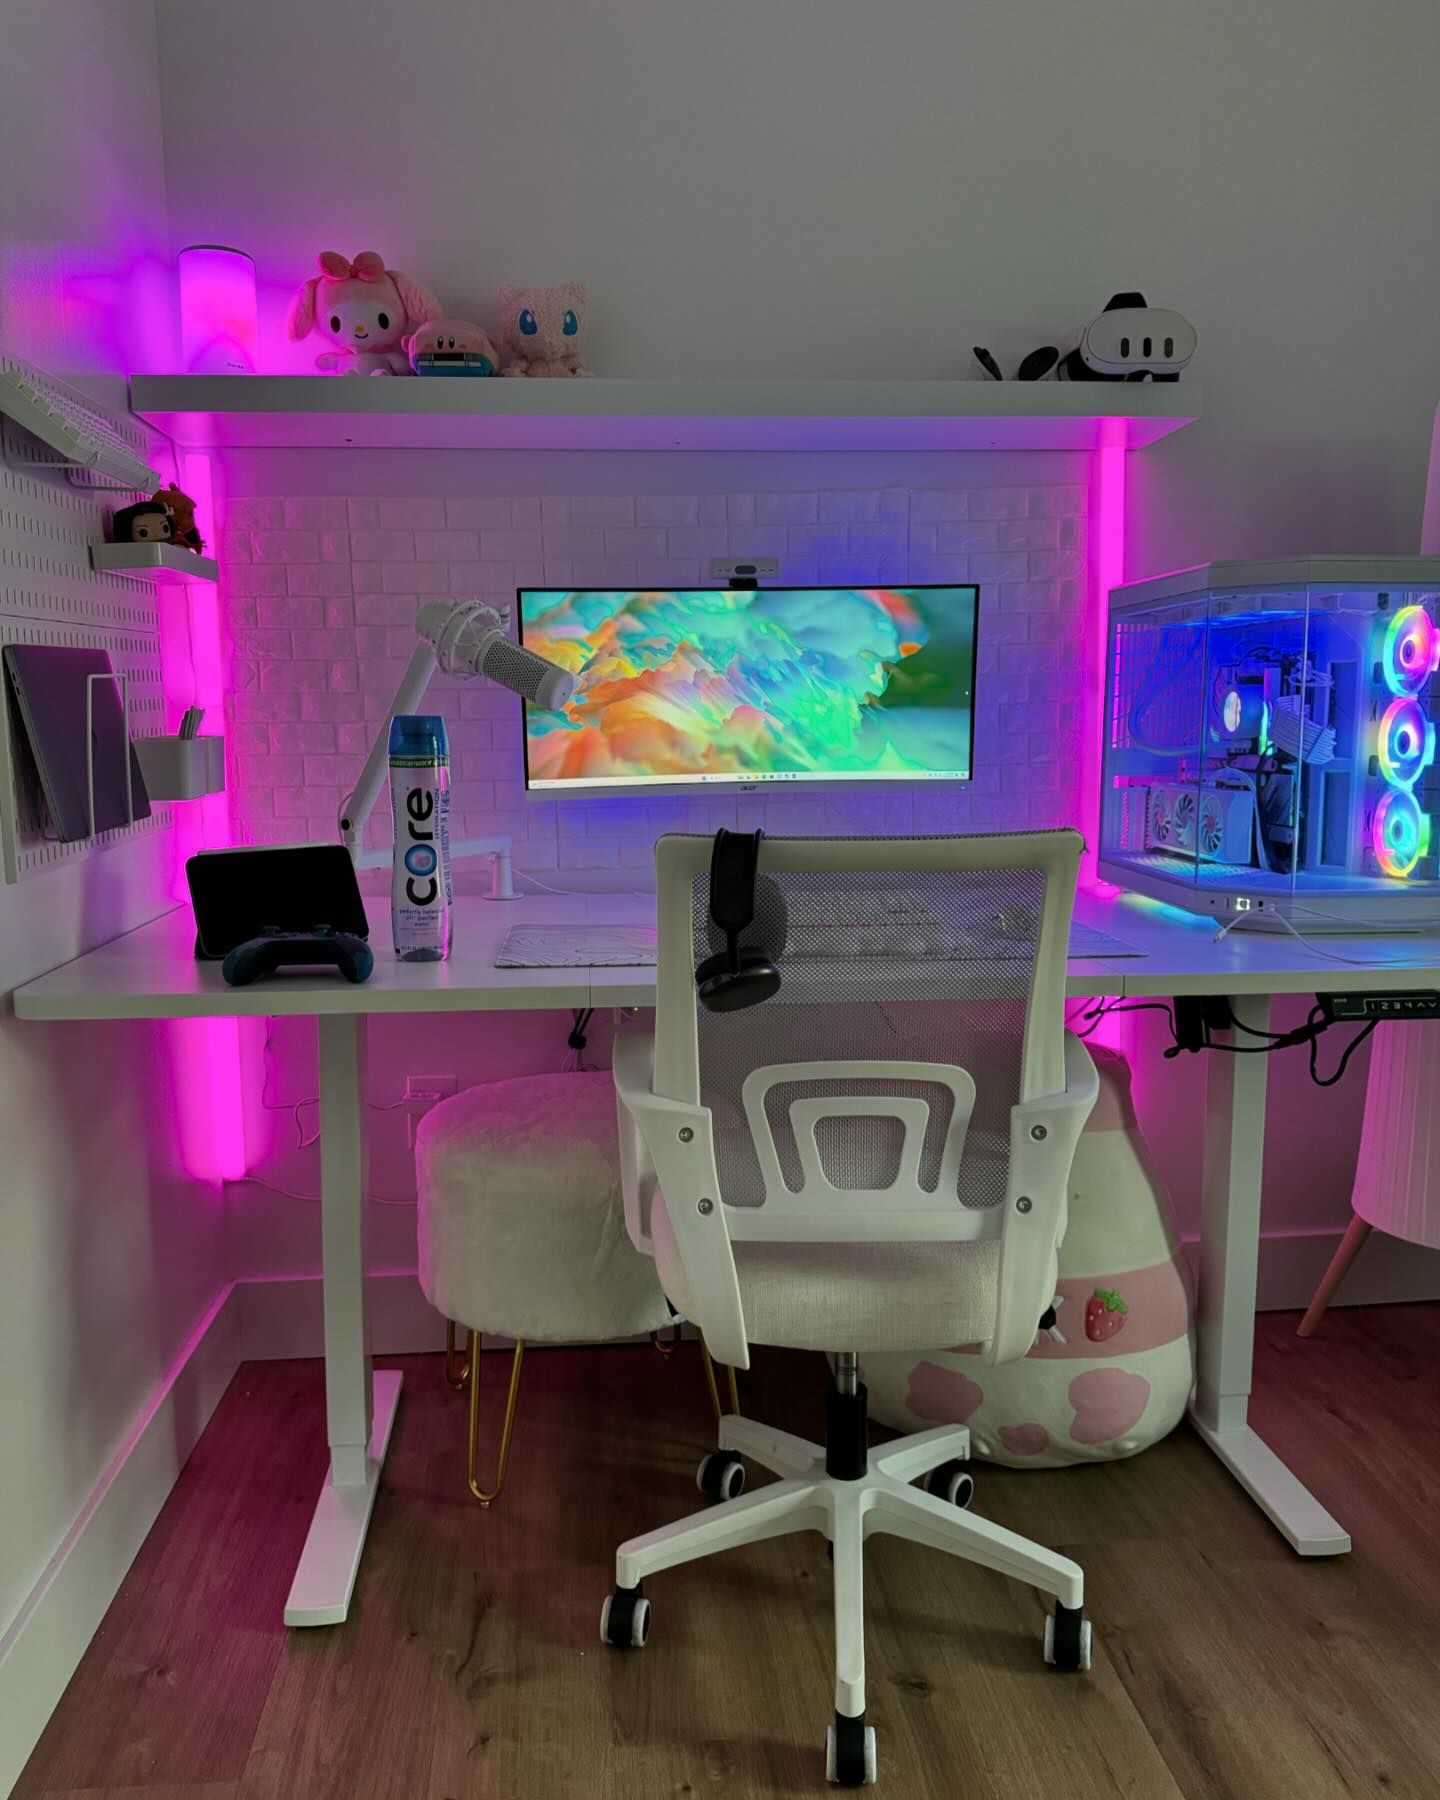 Happy Saturday Everyone! 💗

I just got my new standing desk from Amazon today! I’m in LOVE with it! I’ve never had one before and now I have so much more space on my desk. ☺️

What do you think I should add to my desk? Also any cable management tips? 👉👈

#explore #explorepage #gamergirl #gamergirlsetup #trends #trending #gamergirls